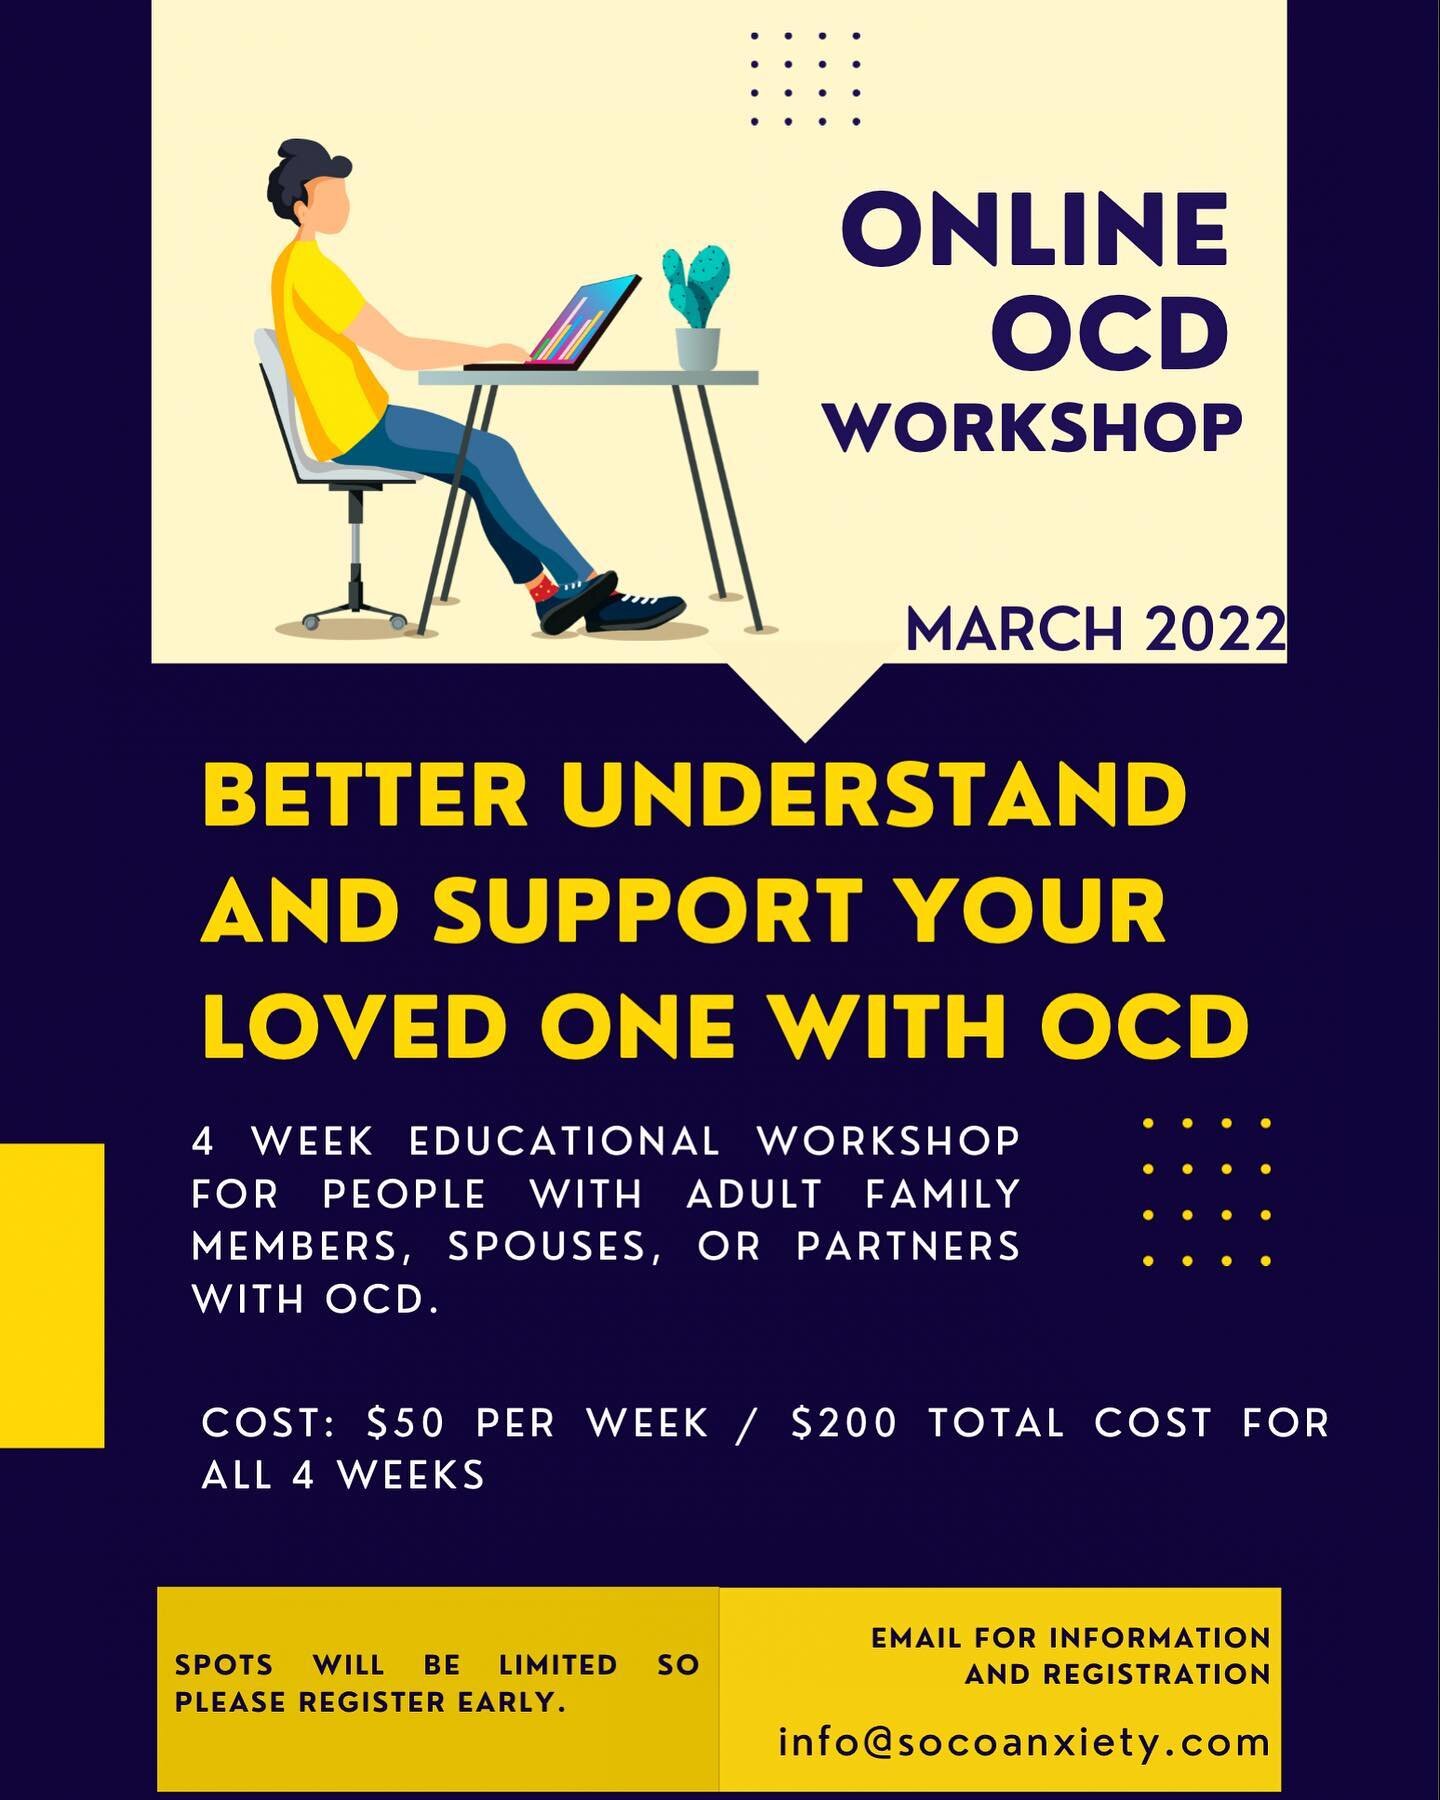 This is a 4 week online educational workshop geared toward those with adult family members, partners, or spouses with OCD. The goals of this workshop will be:⁣
⁣
-To better understand OCD⁣
-How to support a loved one with OCD⁣
-How to care for yourse